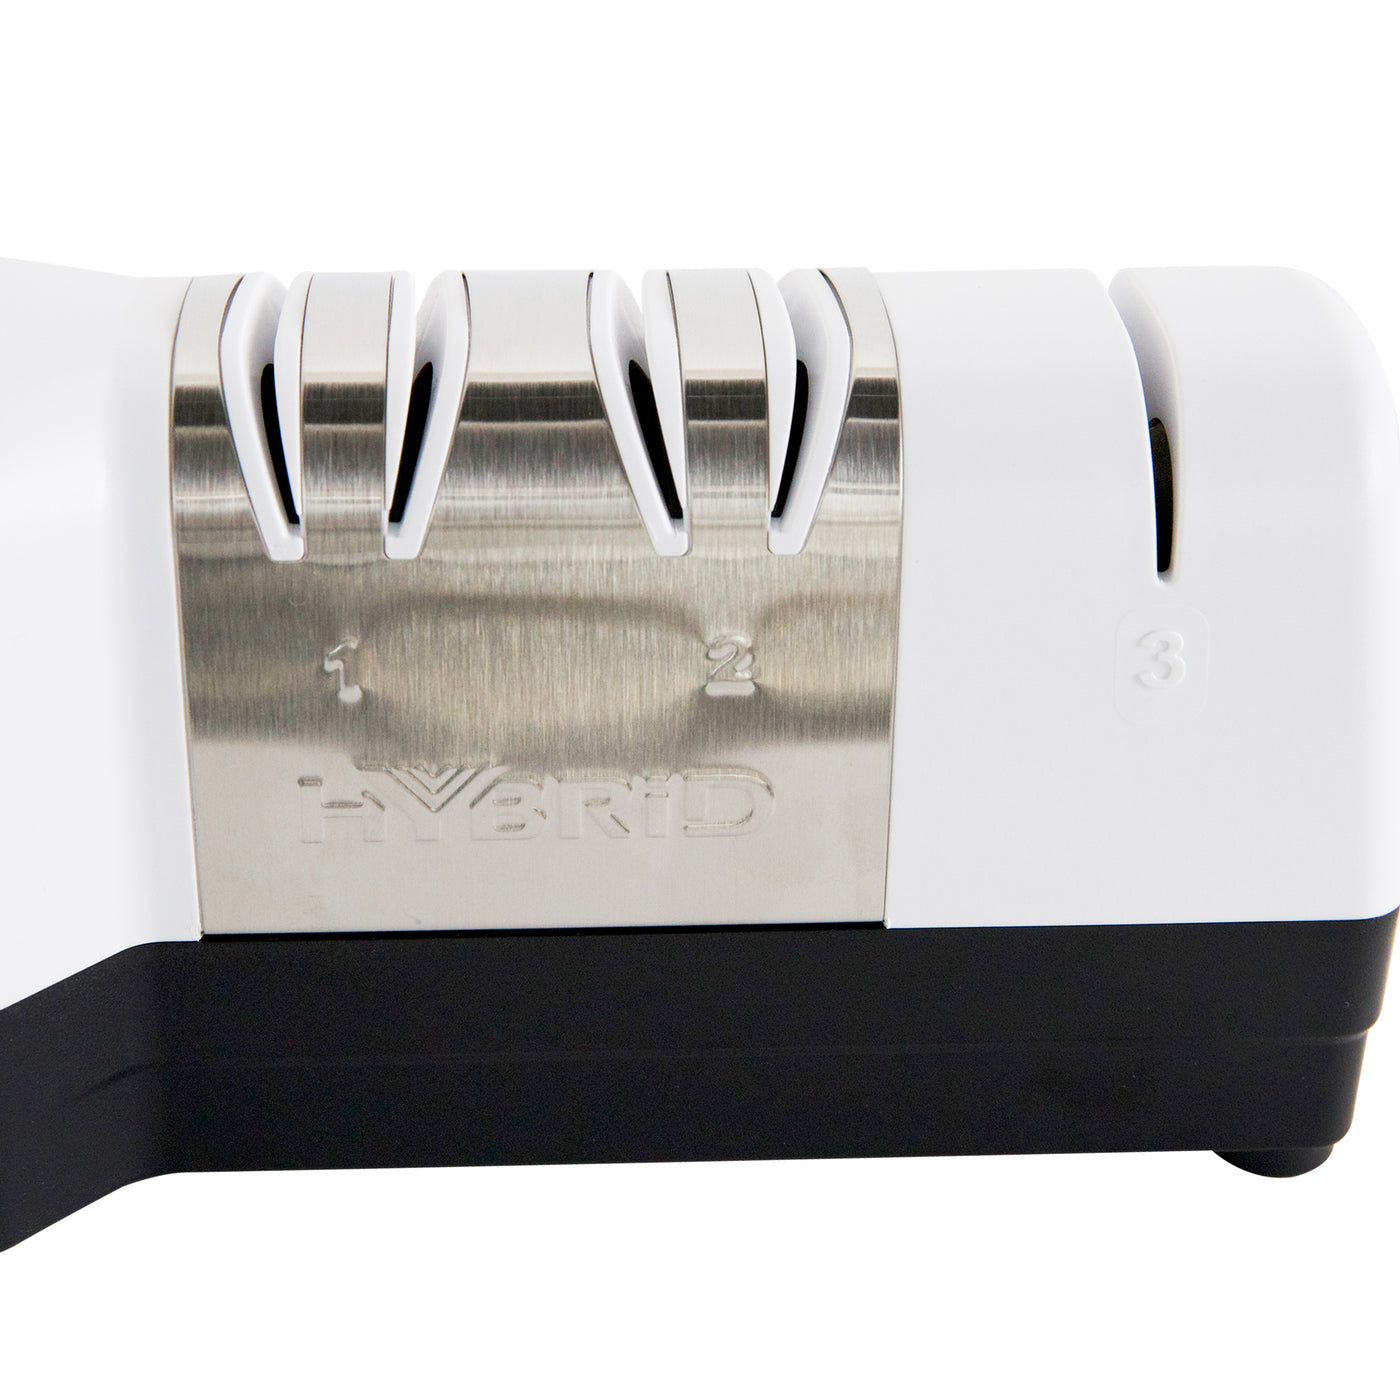 Sustainable Savings Smith's Consumer Products Store. COMPACT ELECTRIC KNIFE  SHARPENER, electric blade sharpener 